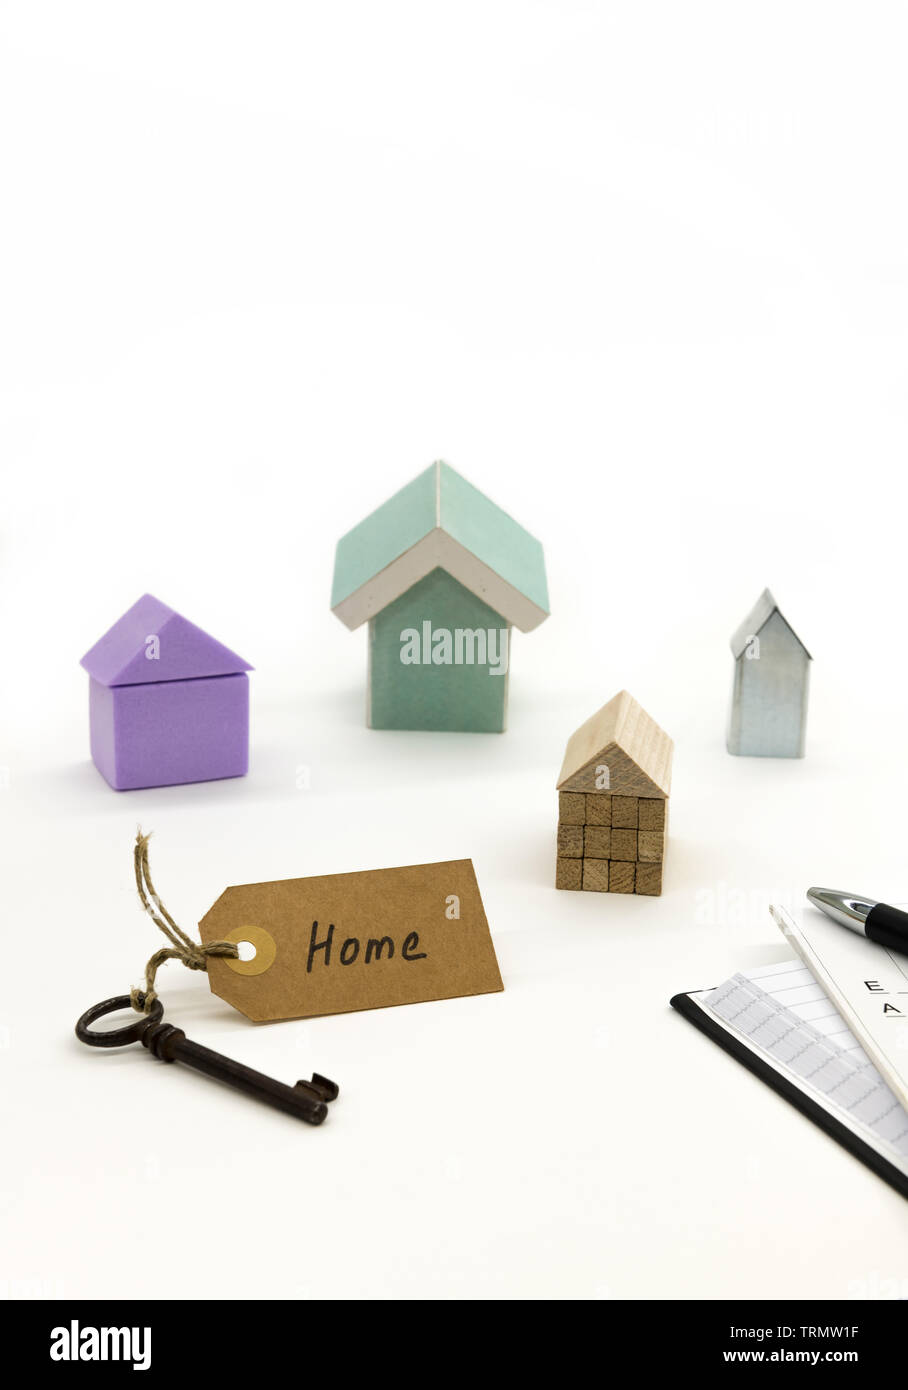 An old key with a sign on which is written "Home". Various model houses, an agenda, plans and a pen. Stock Photo